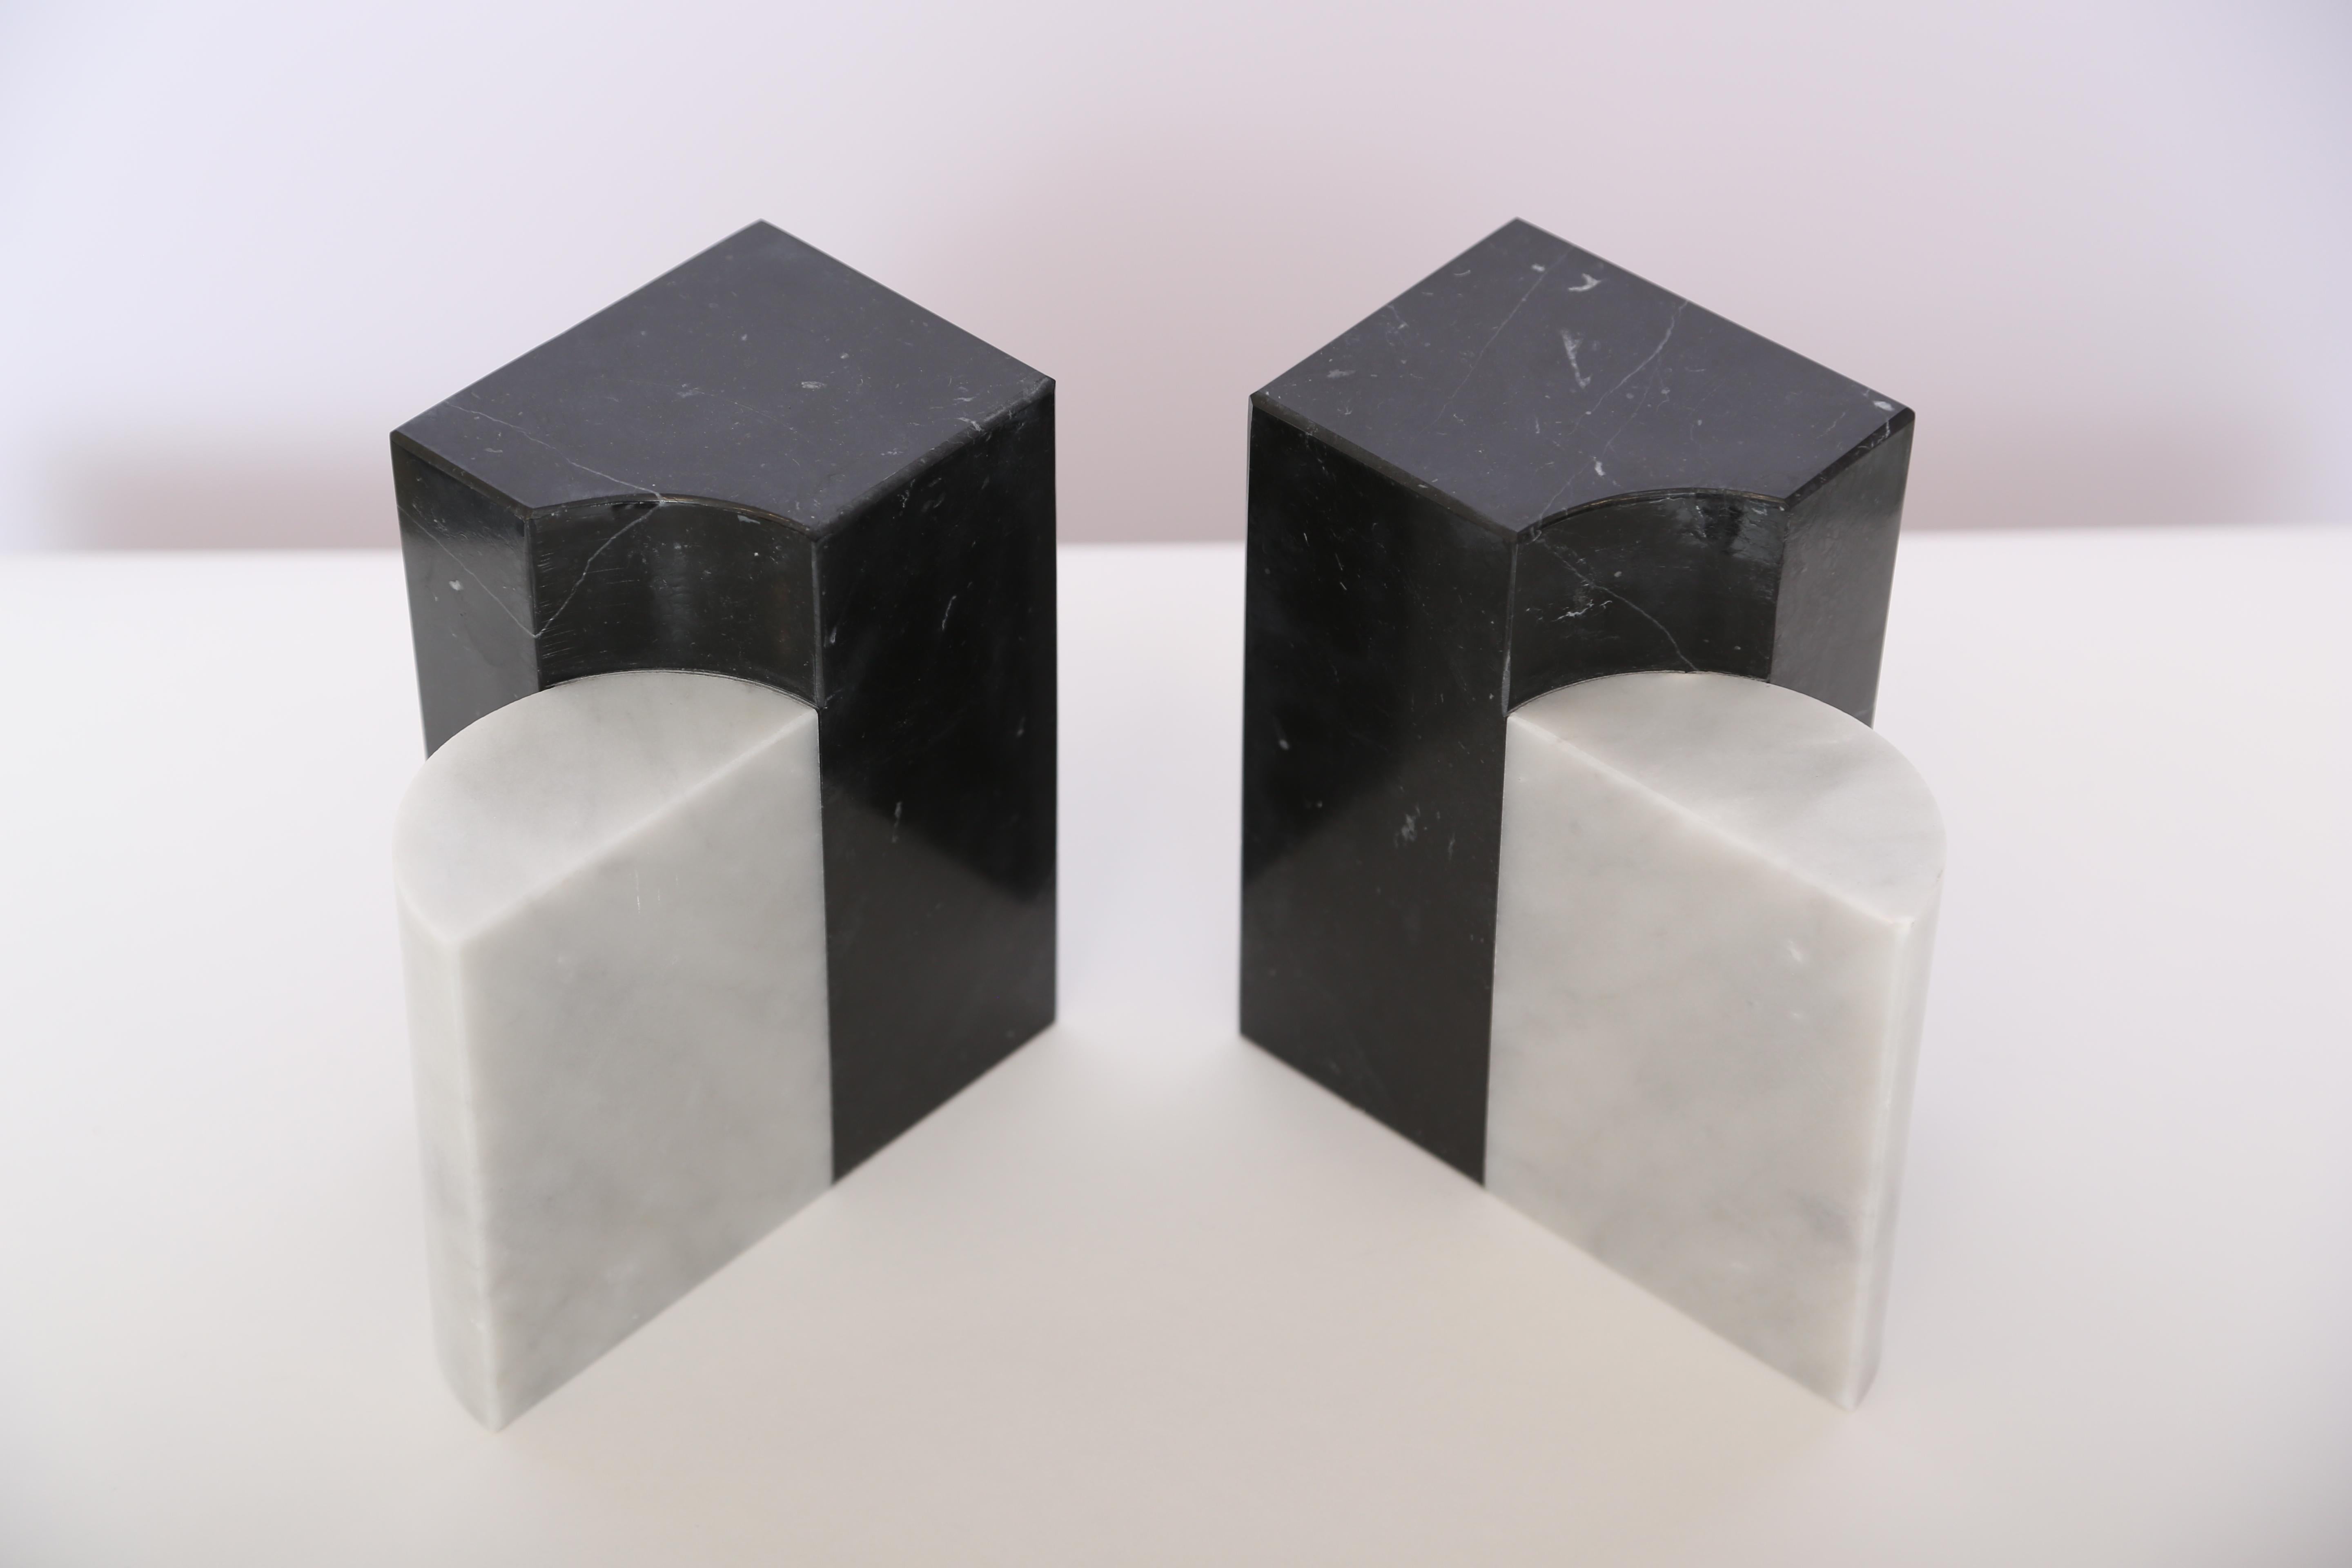 Negro Marquina and Bianco Carrara, cut and polished by hand in Italy, these bookends are perfect for any console or bookshelf.
Measures: 6.5